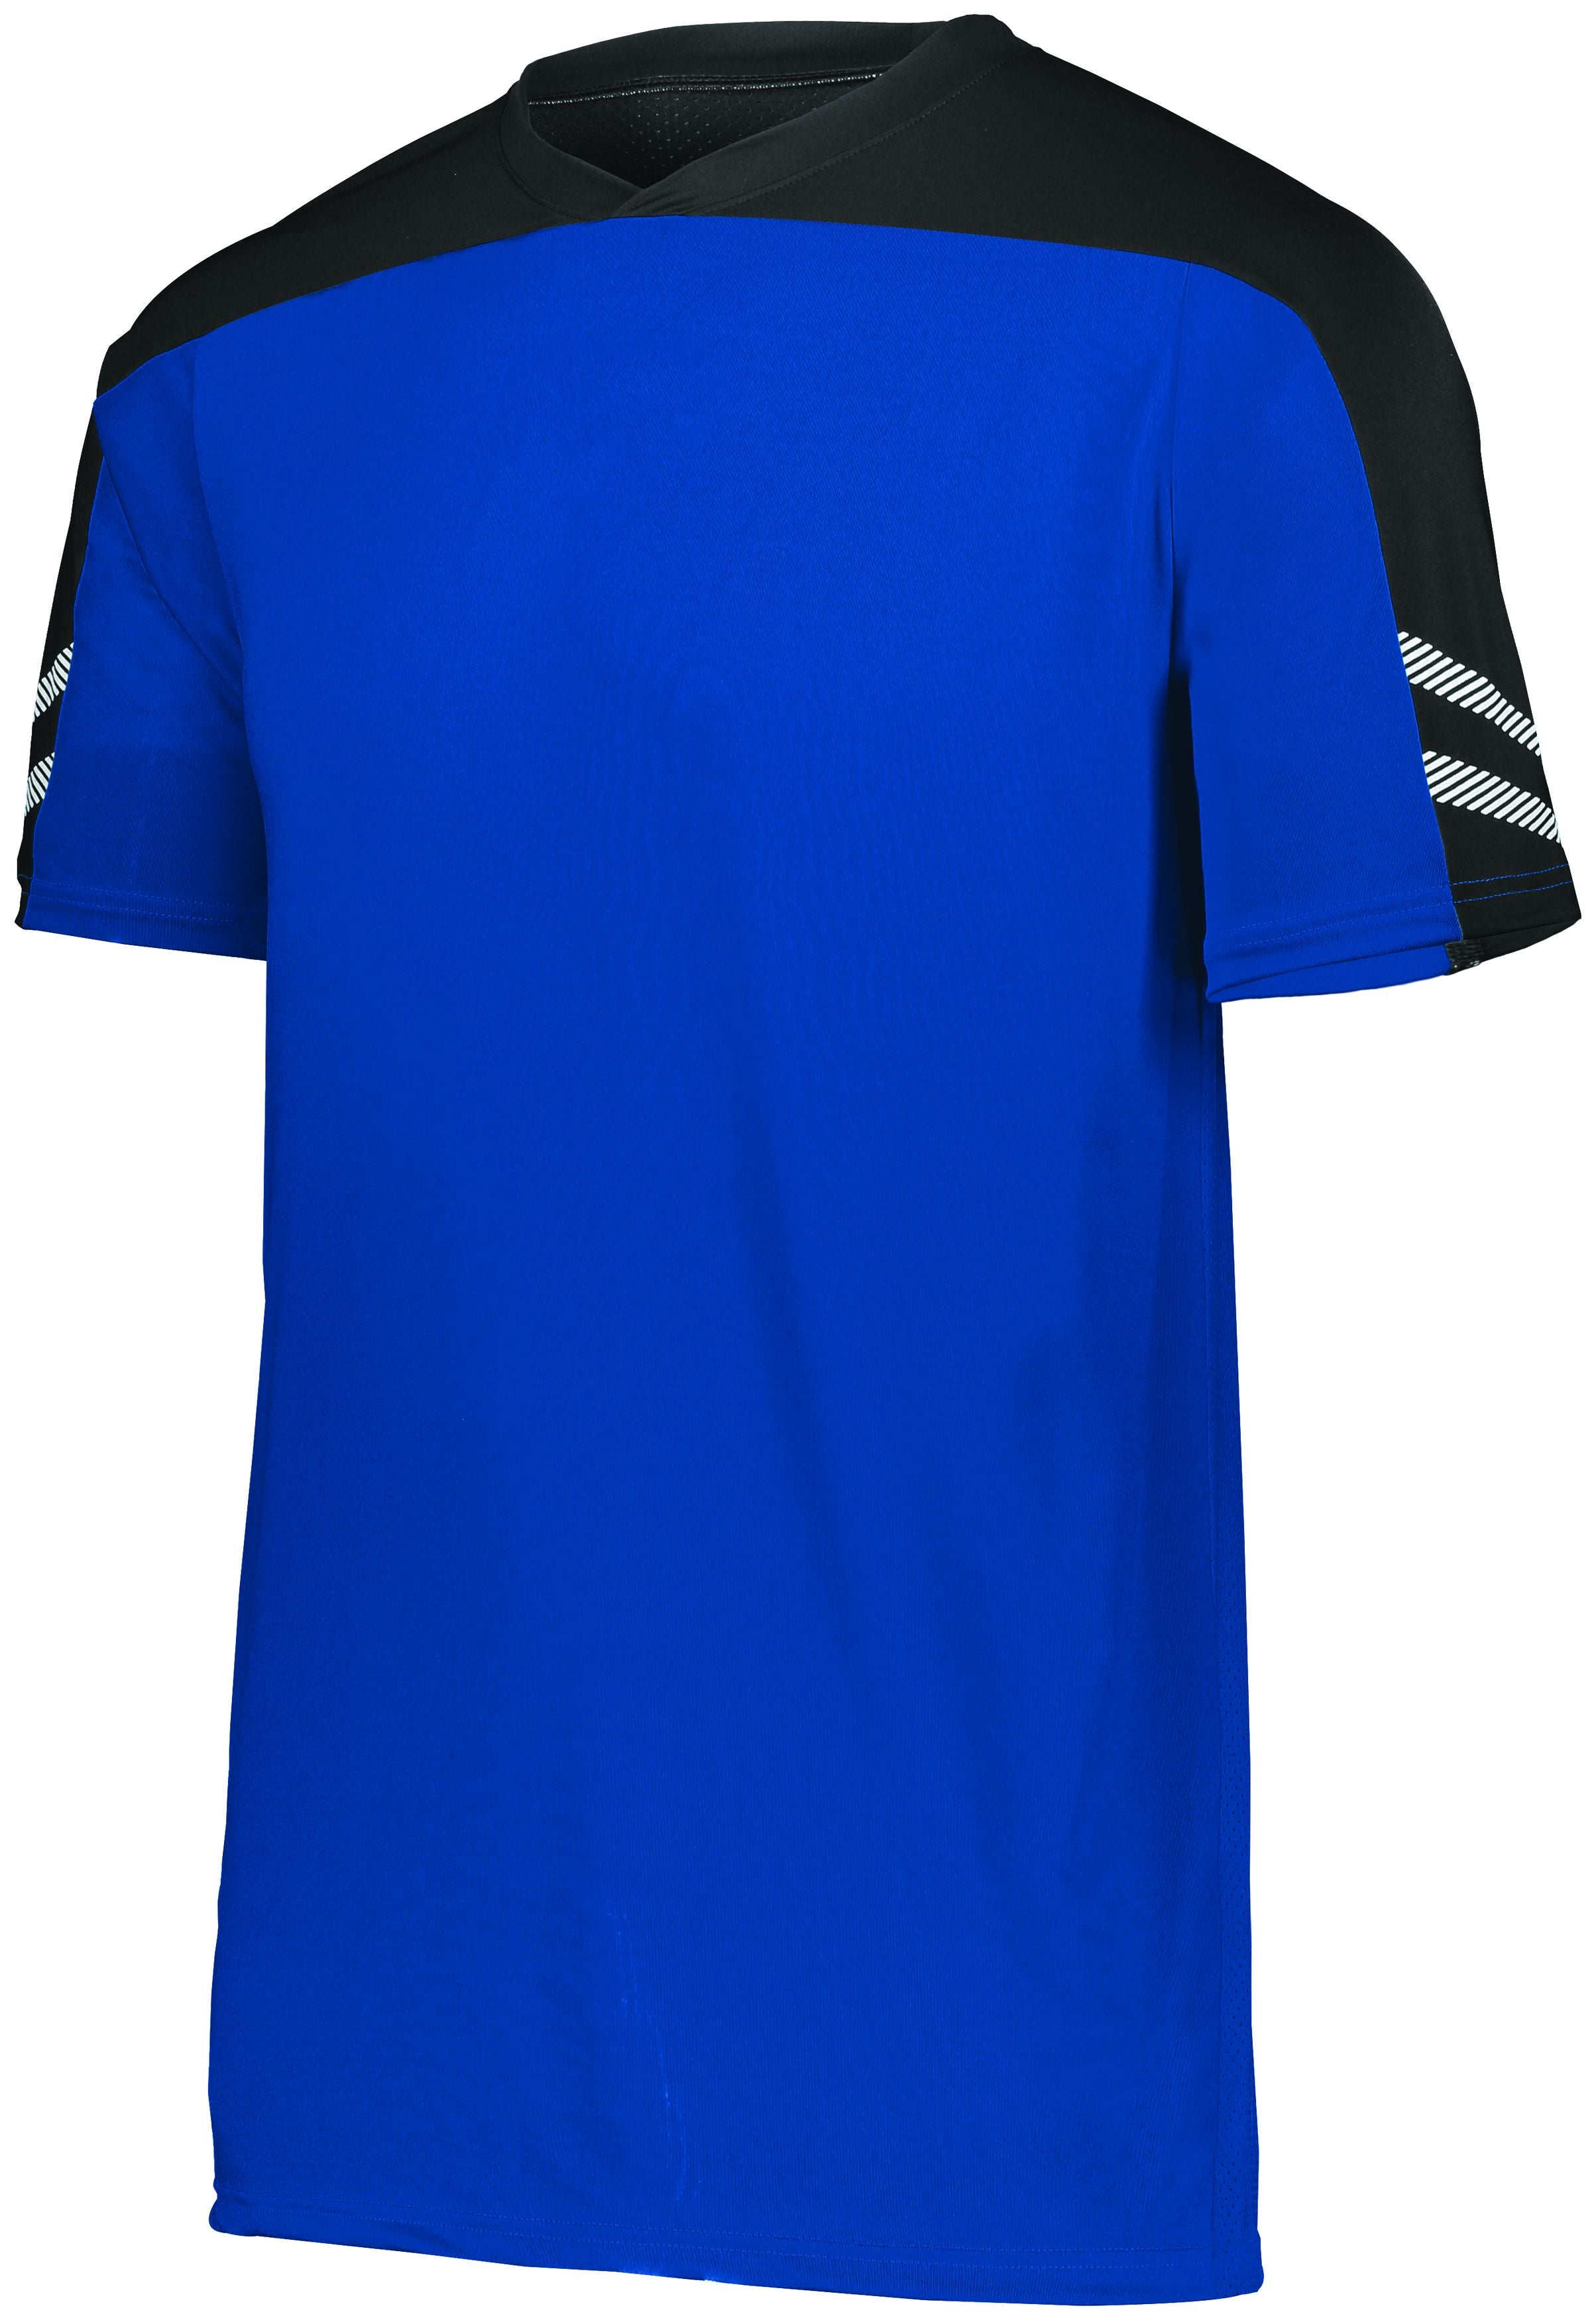 High 5 Youth Anfield Soccer Jersey in Royal/Black/White  -Part of the Youth, Youth-Jersey, High5-Products, Soccer, Shirts, All-Sports-1 product lines at KanaleyCreations.com